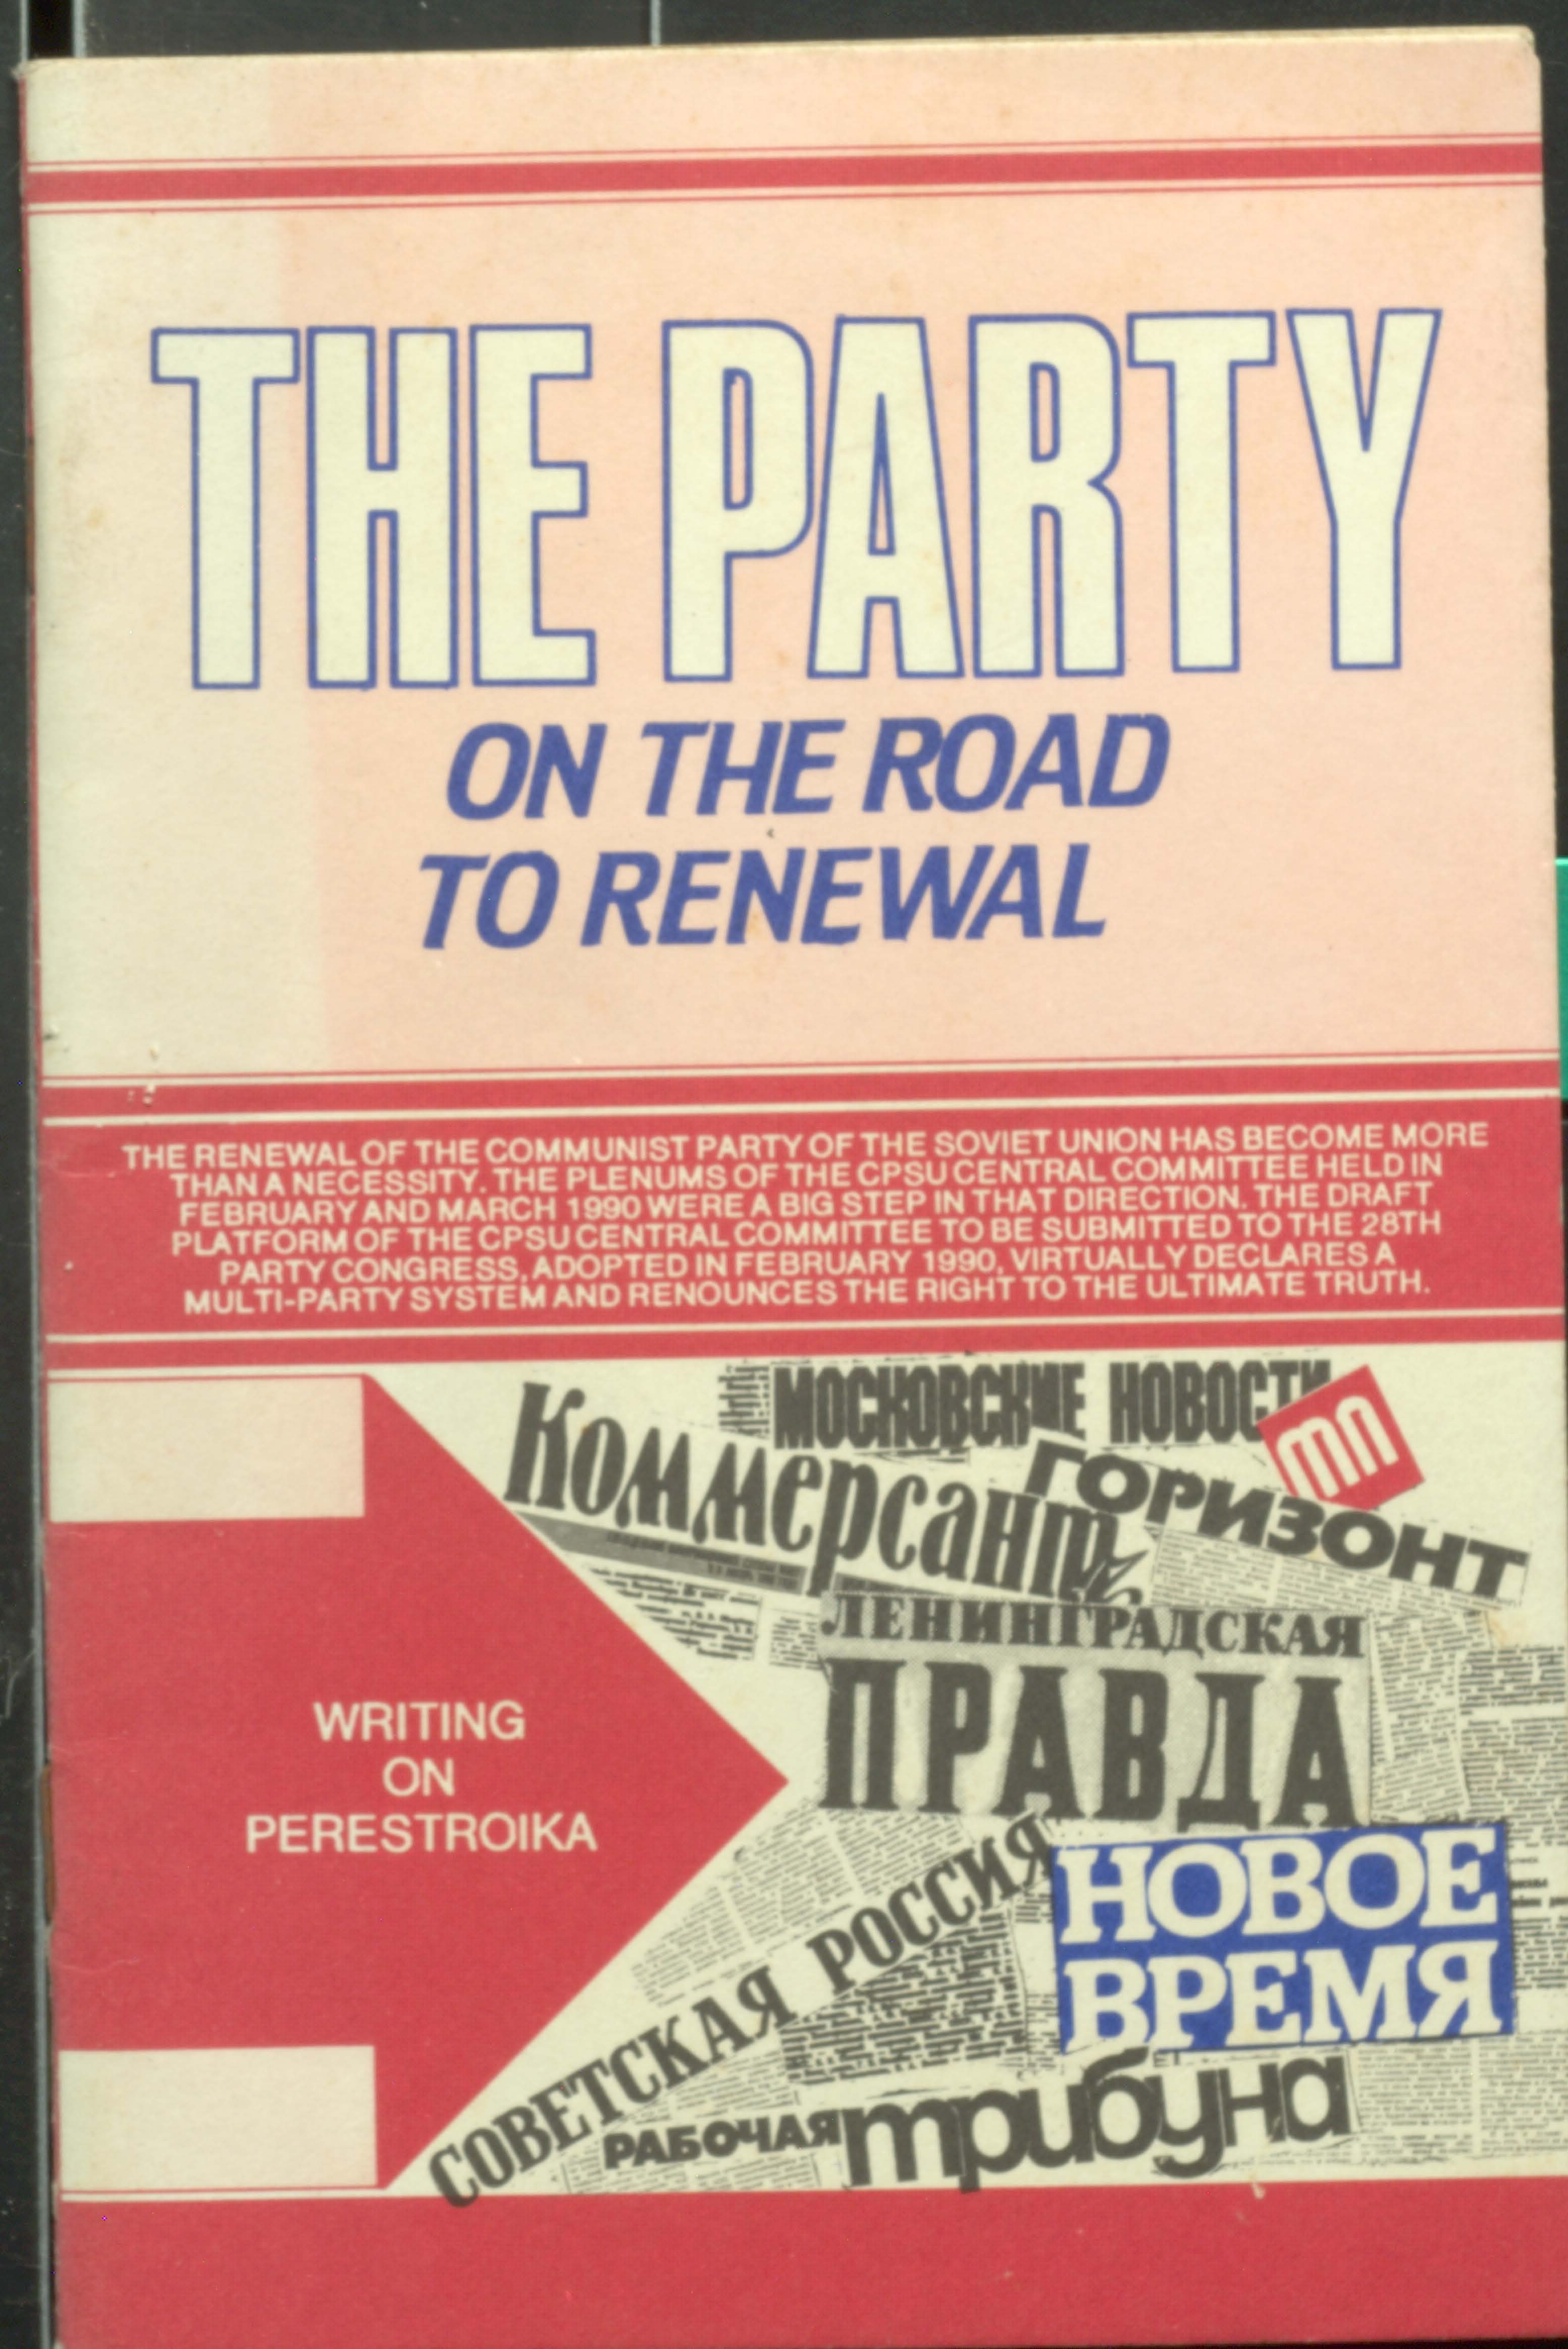 The party on the road to renewal